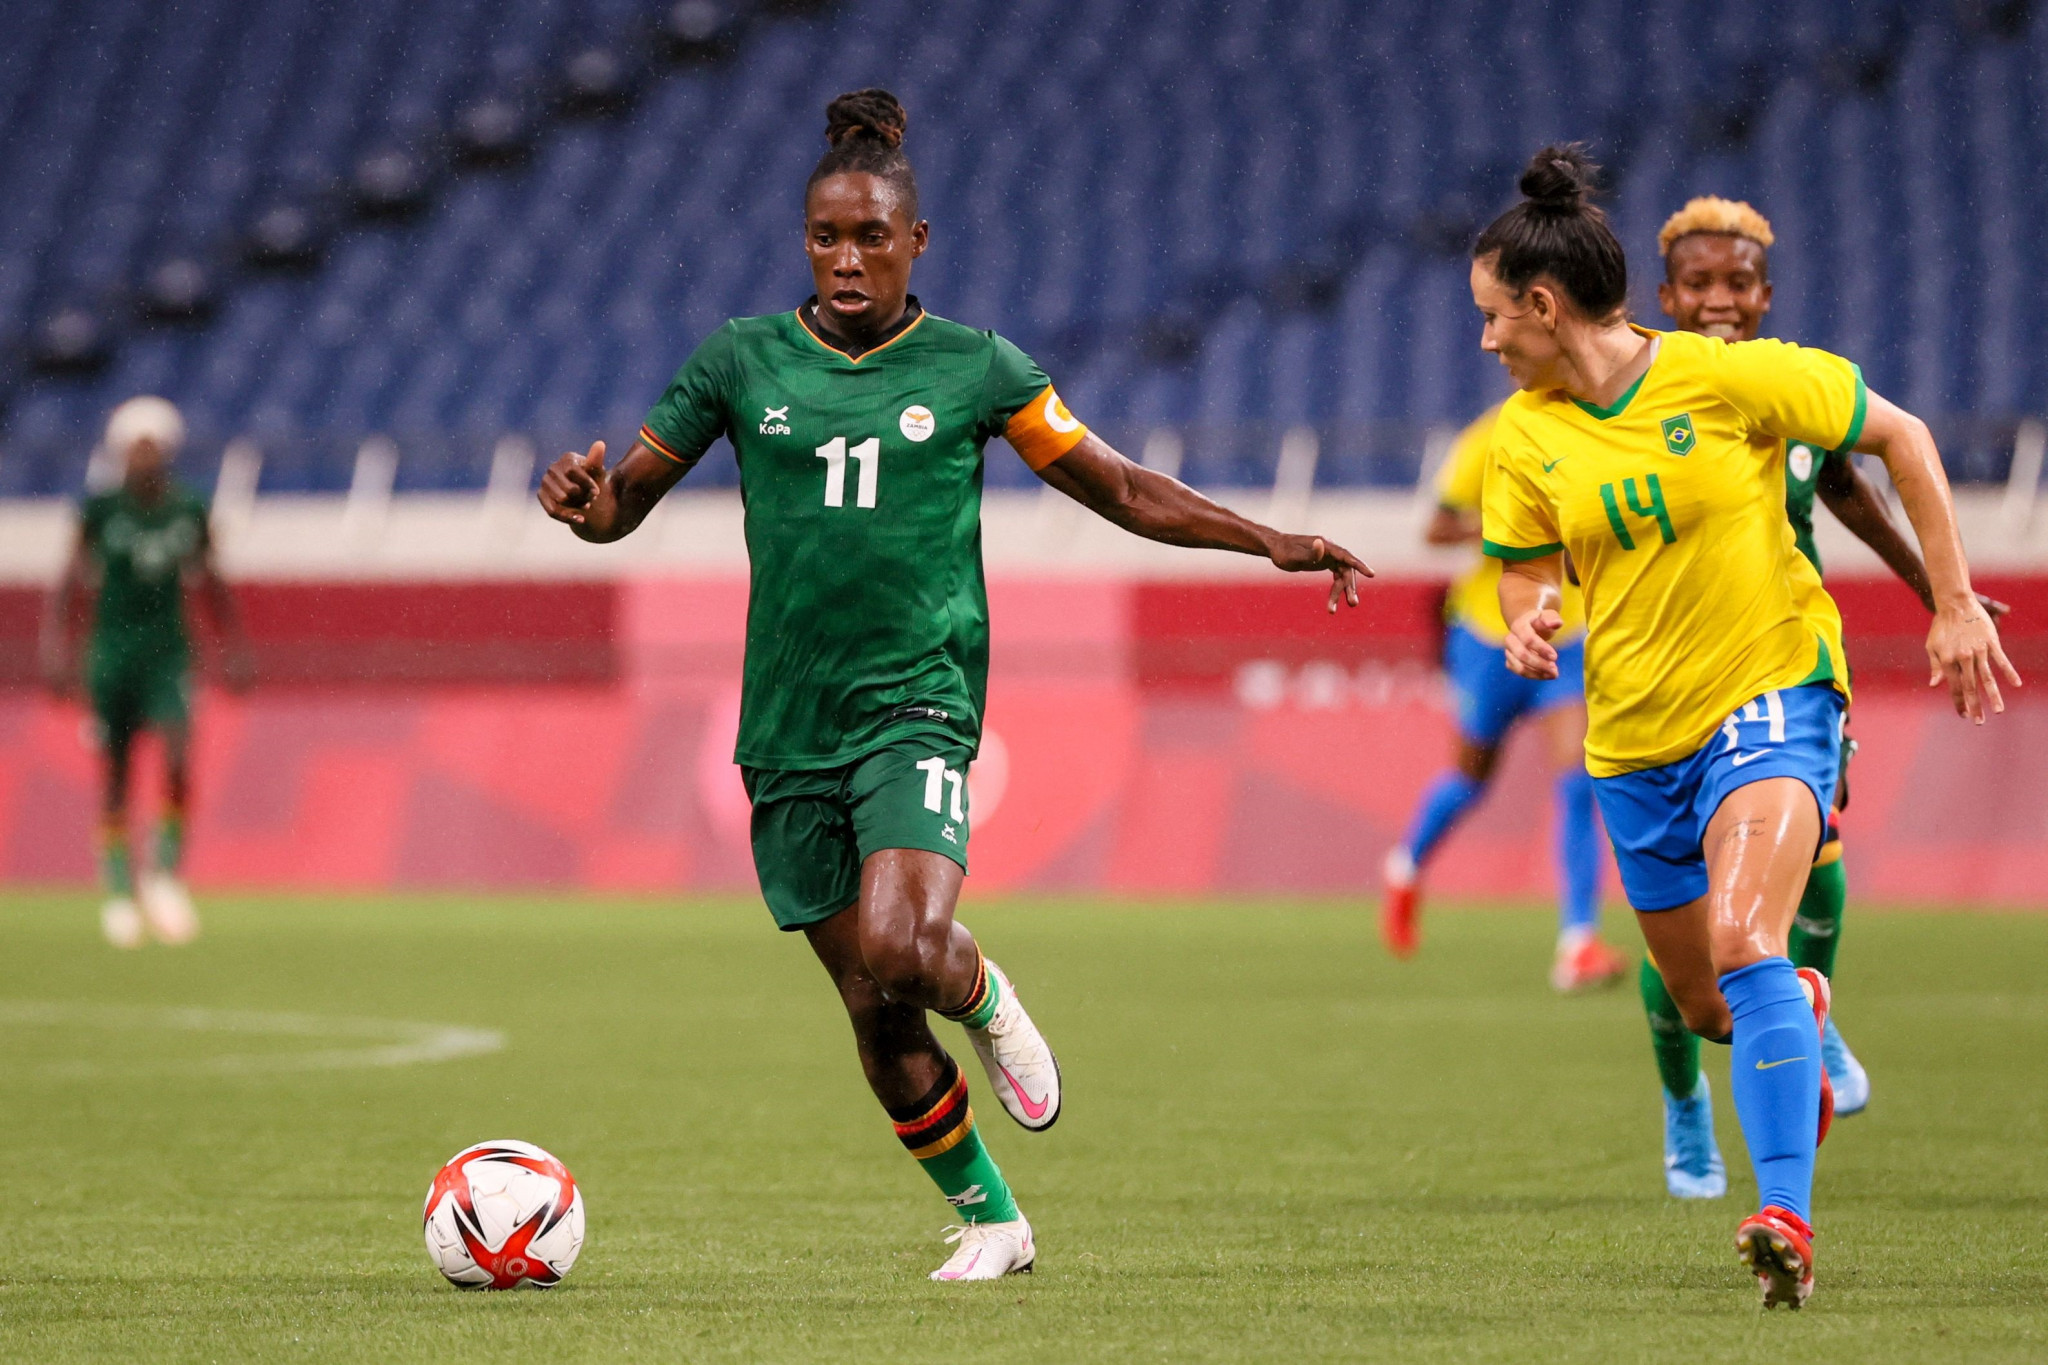 FIFA official confirms eligibility of Zambia striker Banda for Women’s World Cup